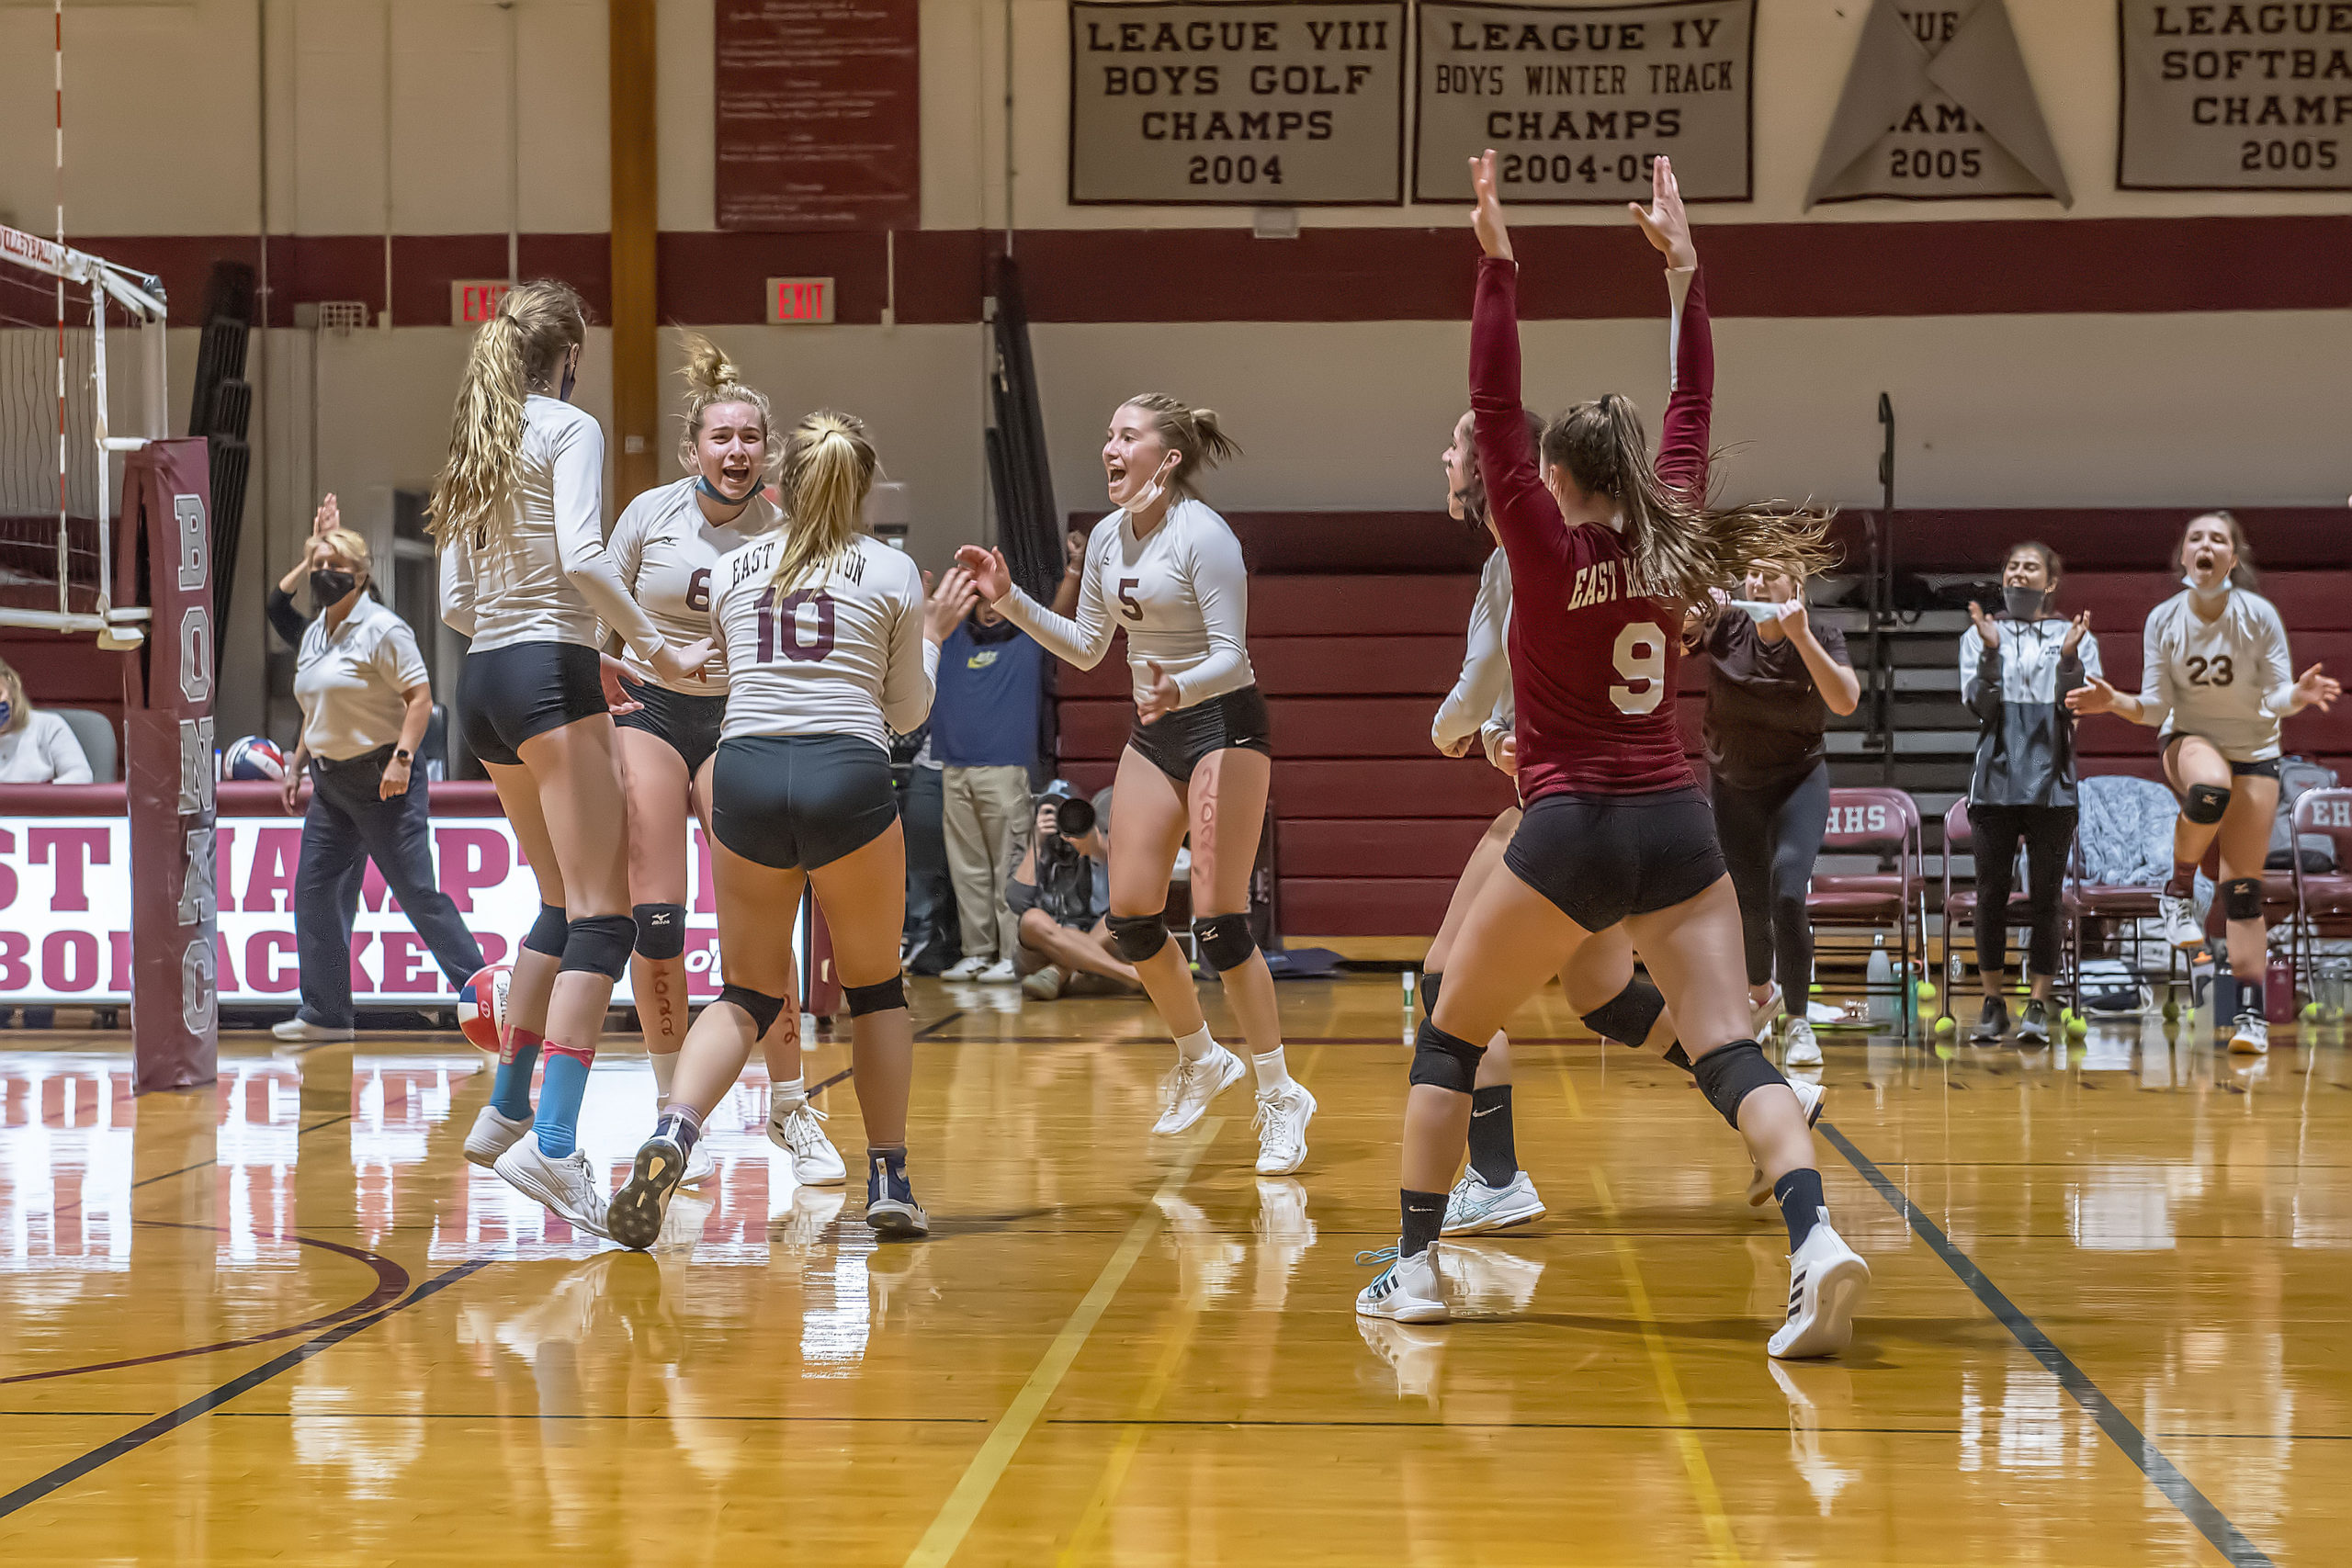 The Bonackers react to their come-from-behind win over Mount Sinai on Wednesday, October 20, that sealed a playoff spot for them.